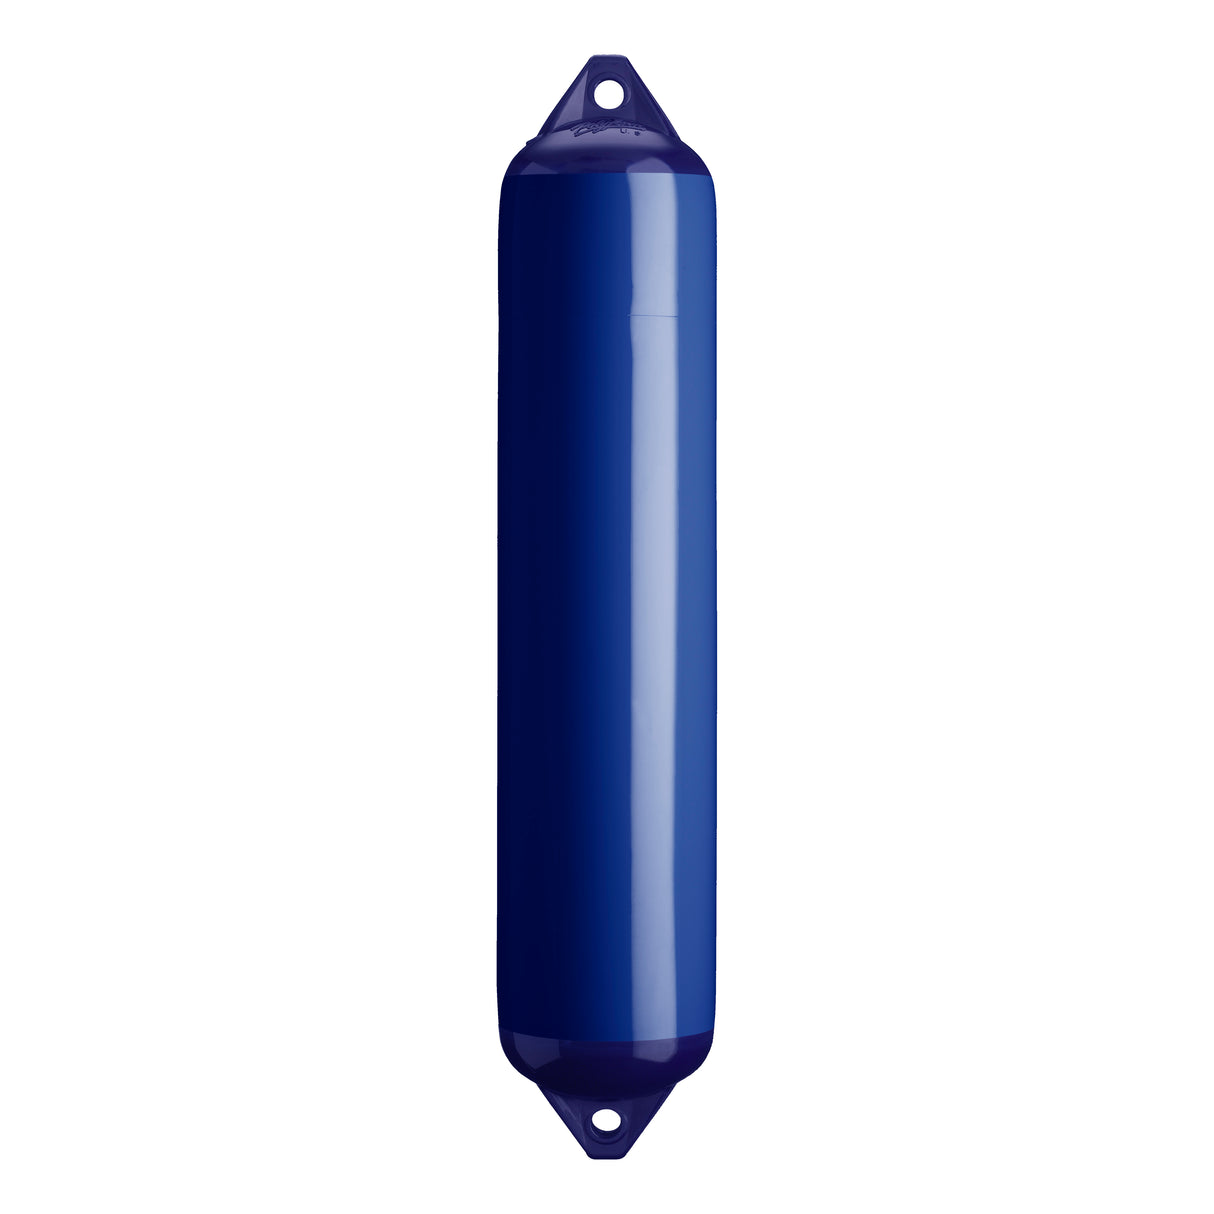 Cobalt Blue boat fender with Navy-Top, Polyform F-4 